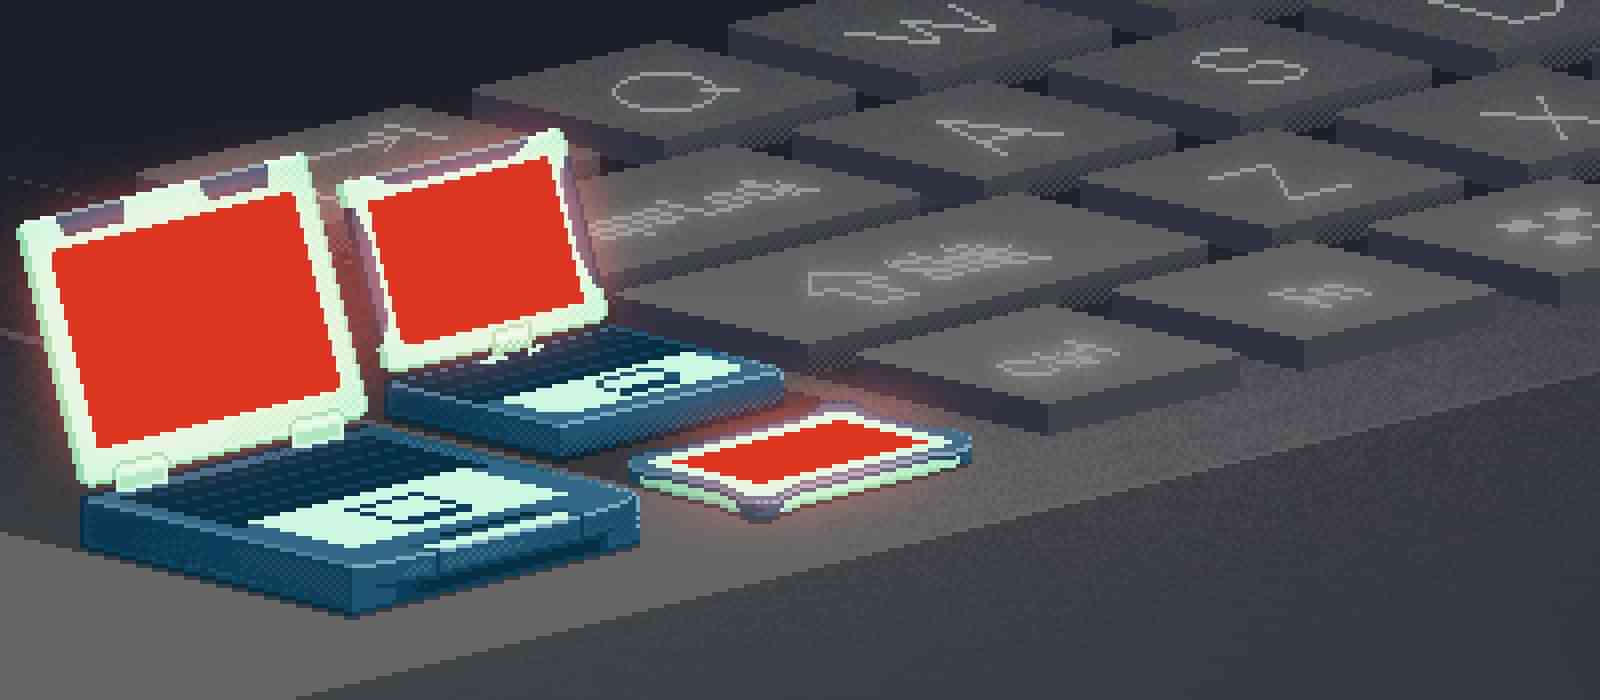 Pixel-art Toughbooks and a giant keyboard sit on a mysterious ledge or something